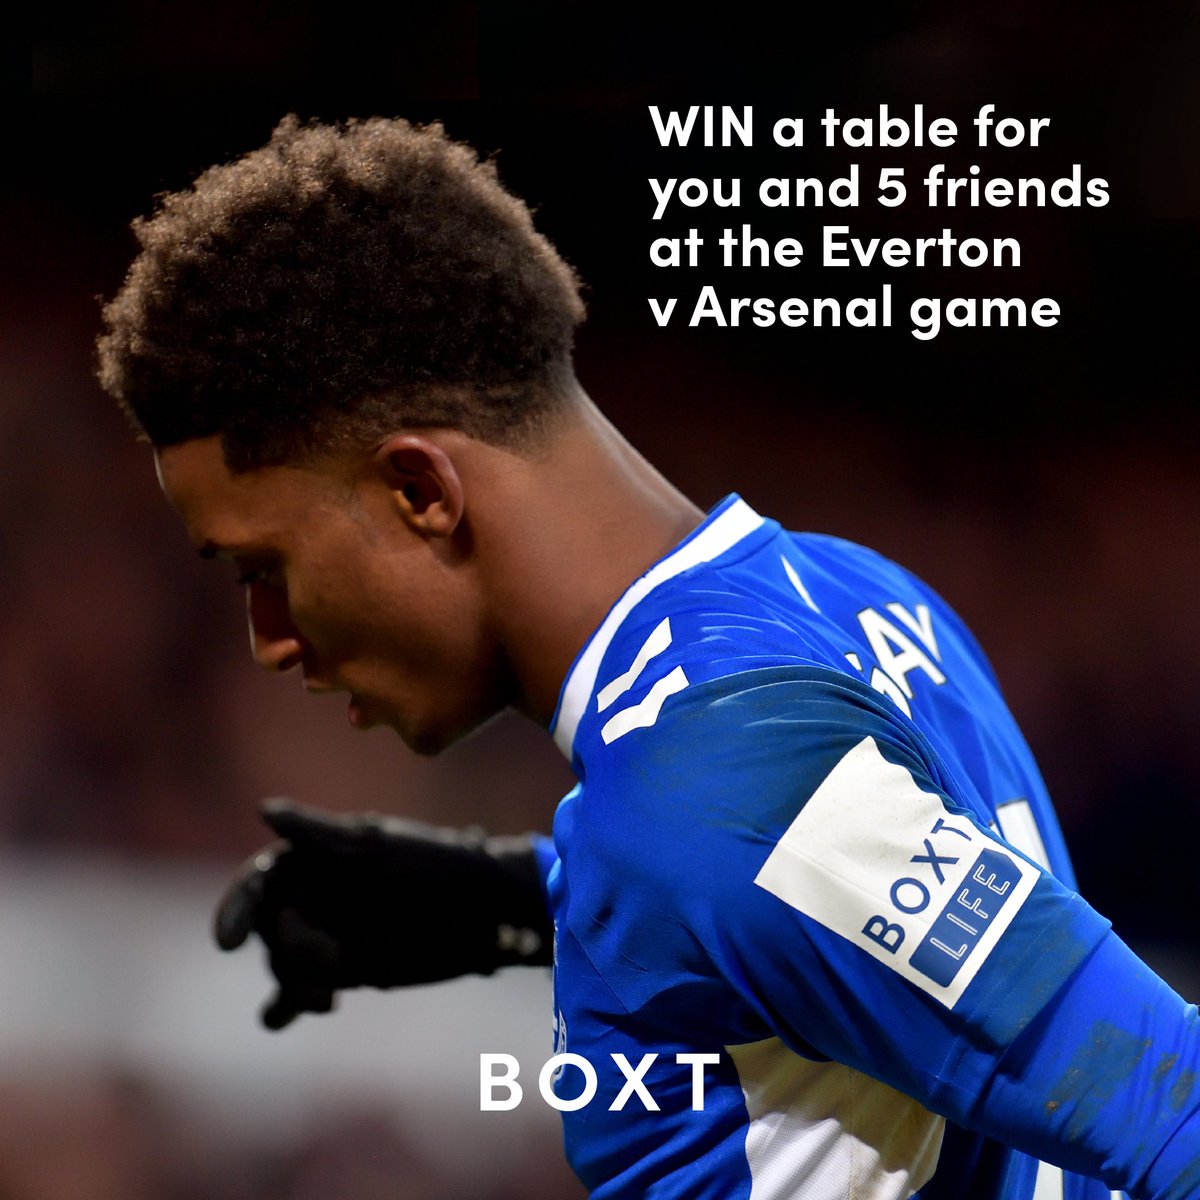 We’re giving you the chance to #WIN a table for you and 5 friends in the 1878 brasserie lounge at the @Everton v Arsenal game this Saturday!⚽ To enter: 🔵Follow us 🔵Tell us why you and your friends should go 🔵Retweet Comp ends & winner announced 02/02 at 11am T&C’s apply